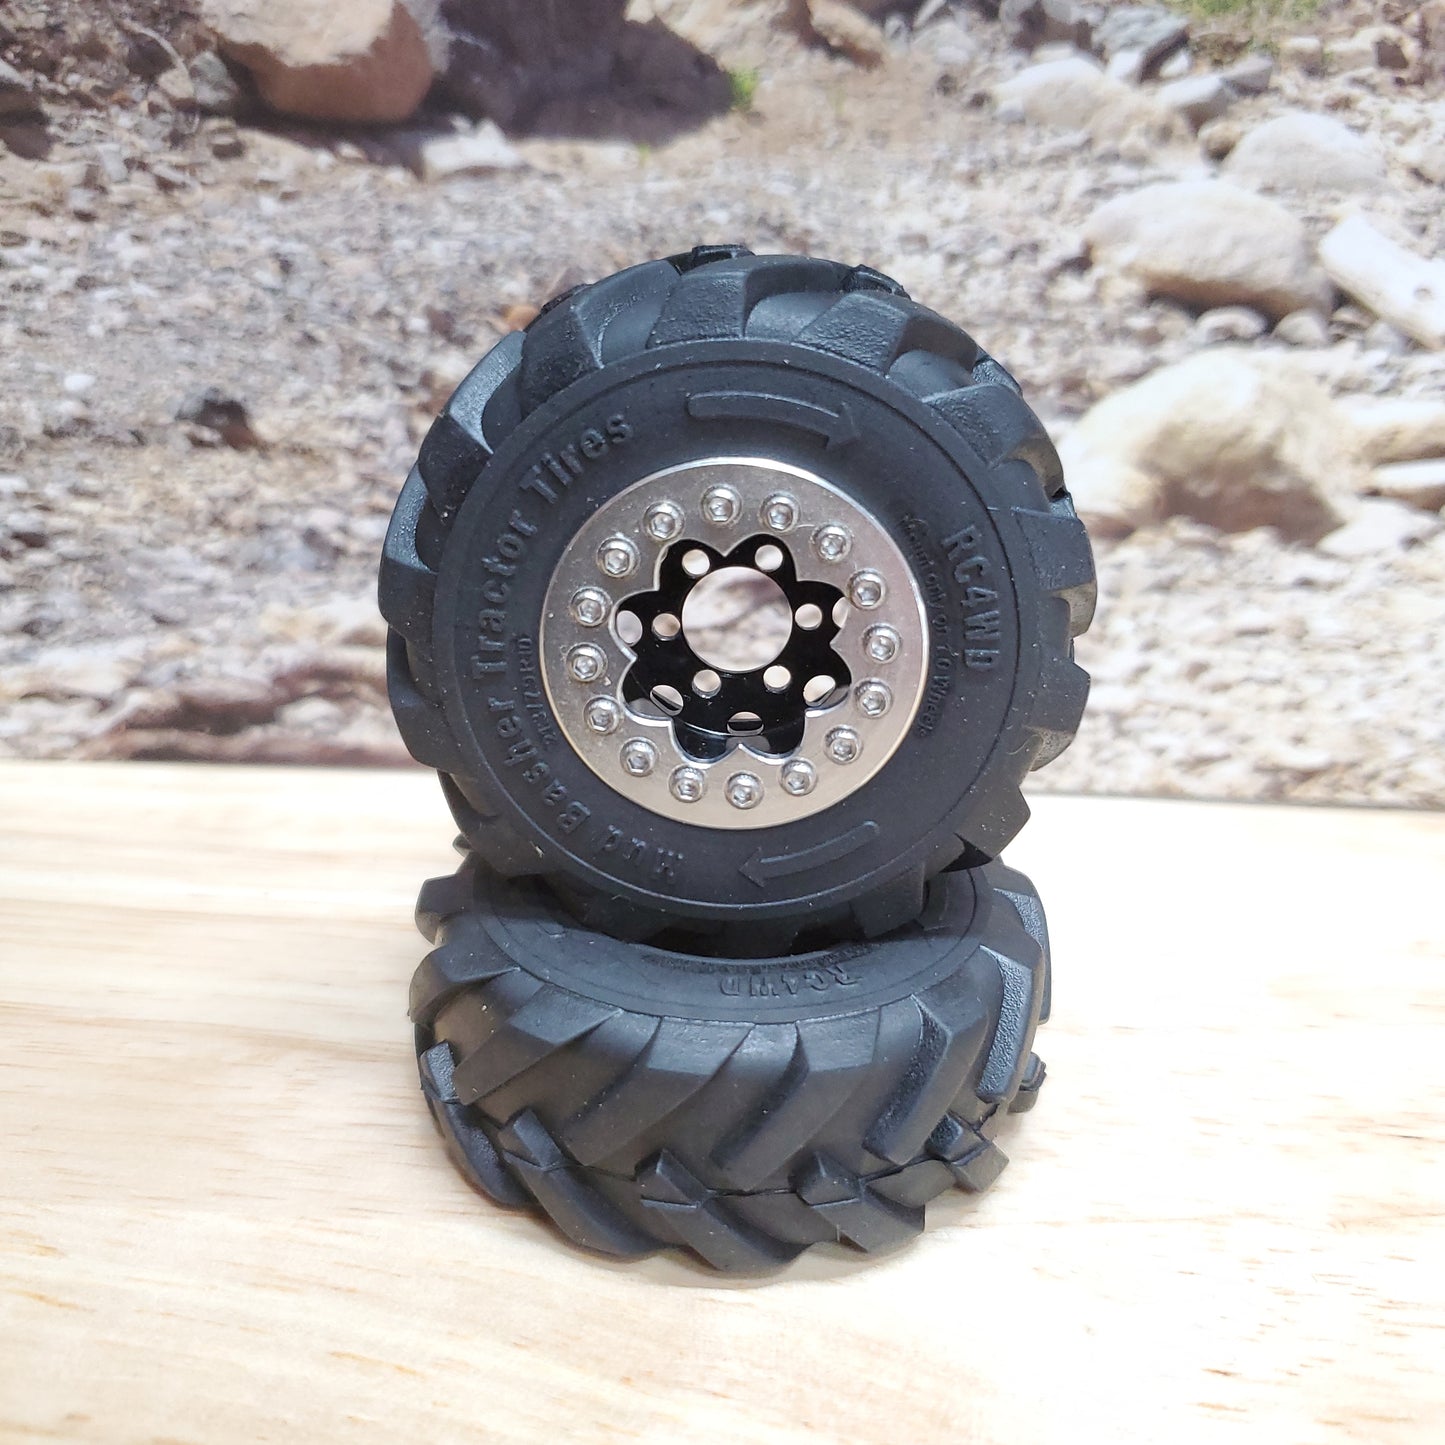 Rc4wd Mud Basher 1.0" tires